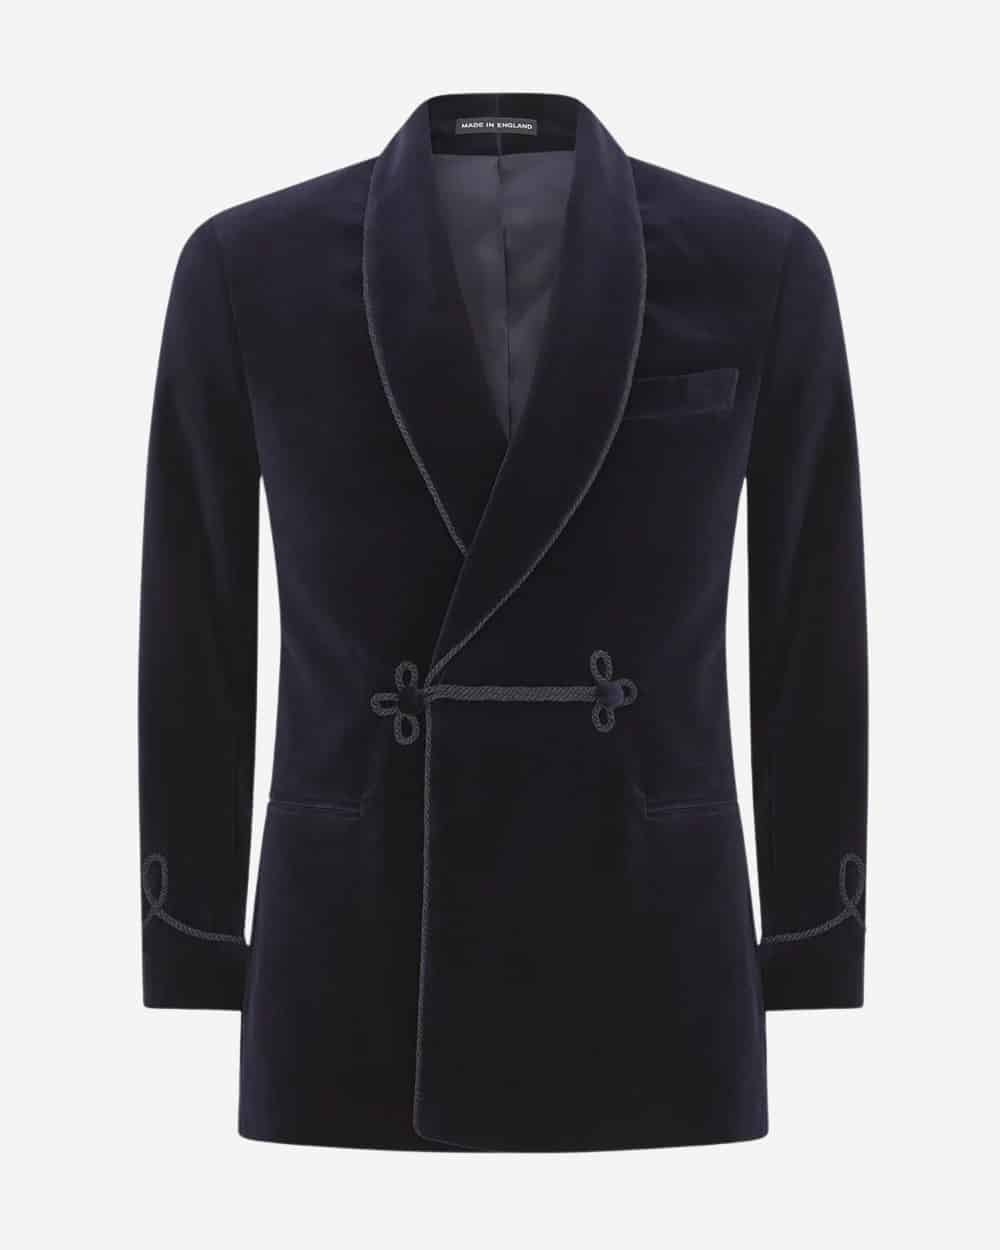 The Smoking Jacket: What It Is & Why You Should Buy One